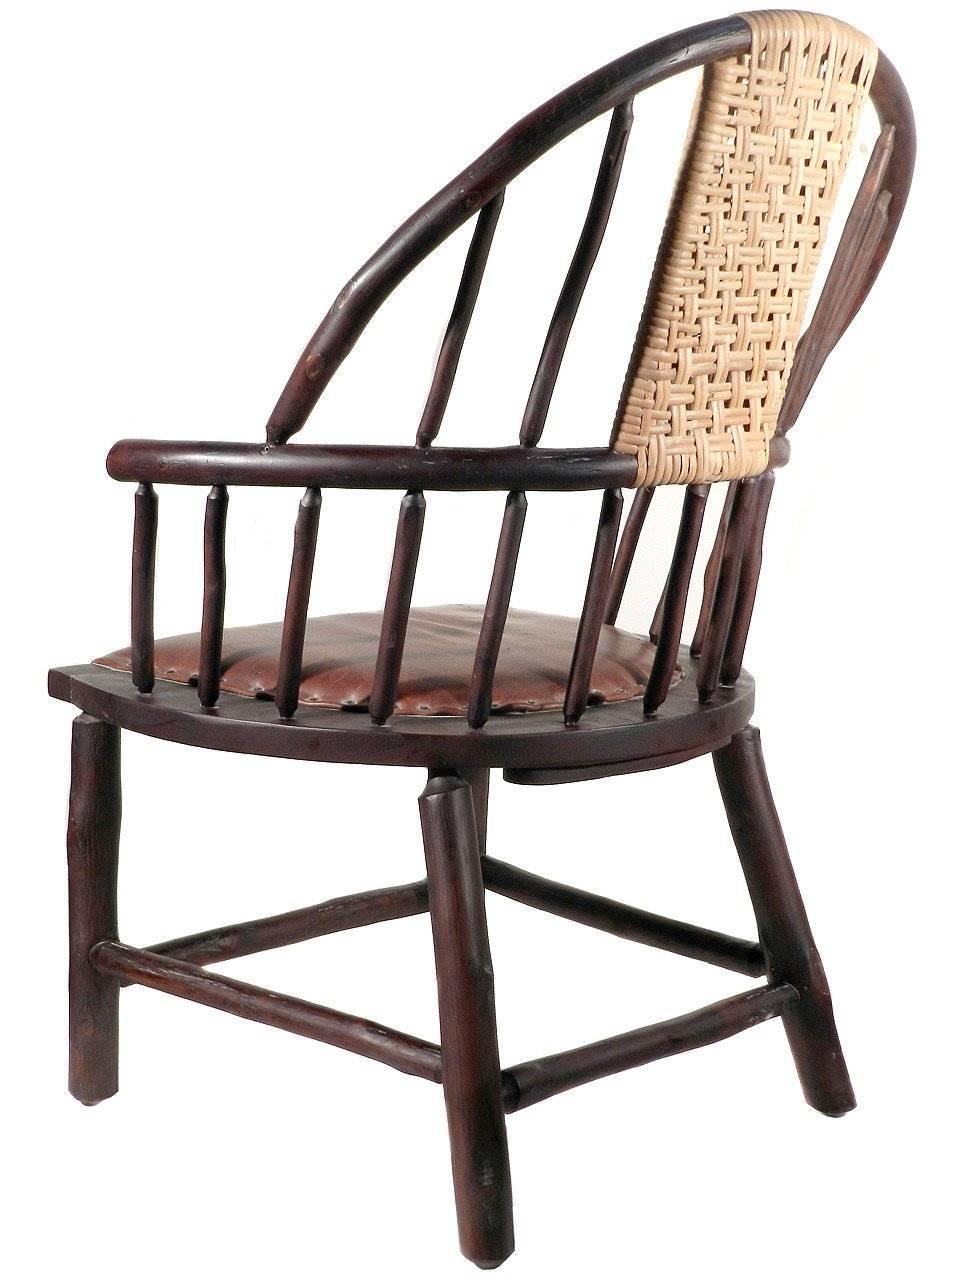 This grand country old hickory Windsor chair is a beautiful combination of hickory, rattan and leather. It was created and signed by Flat Rock Furniture and is their oversized custom 061 Windsor chair. They are the very high end of Adirondack Old